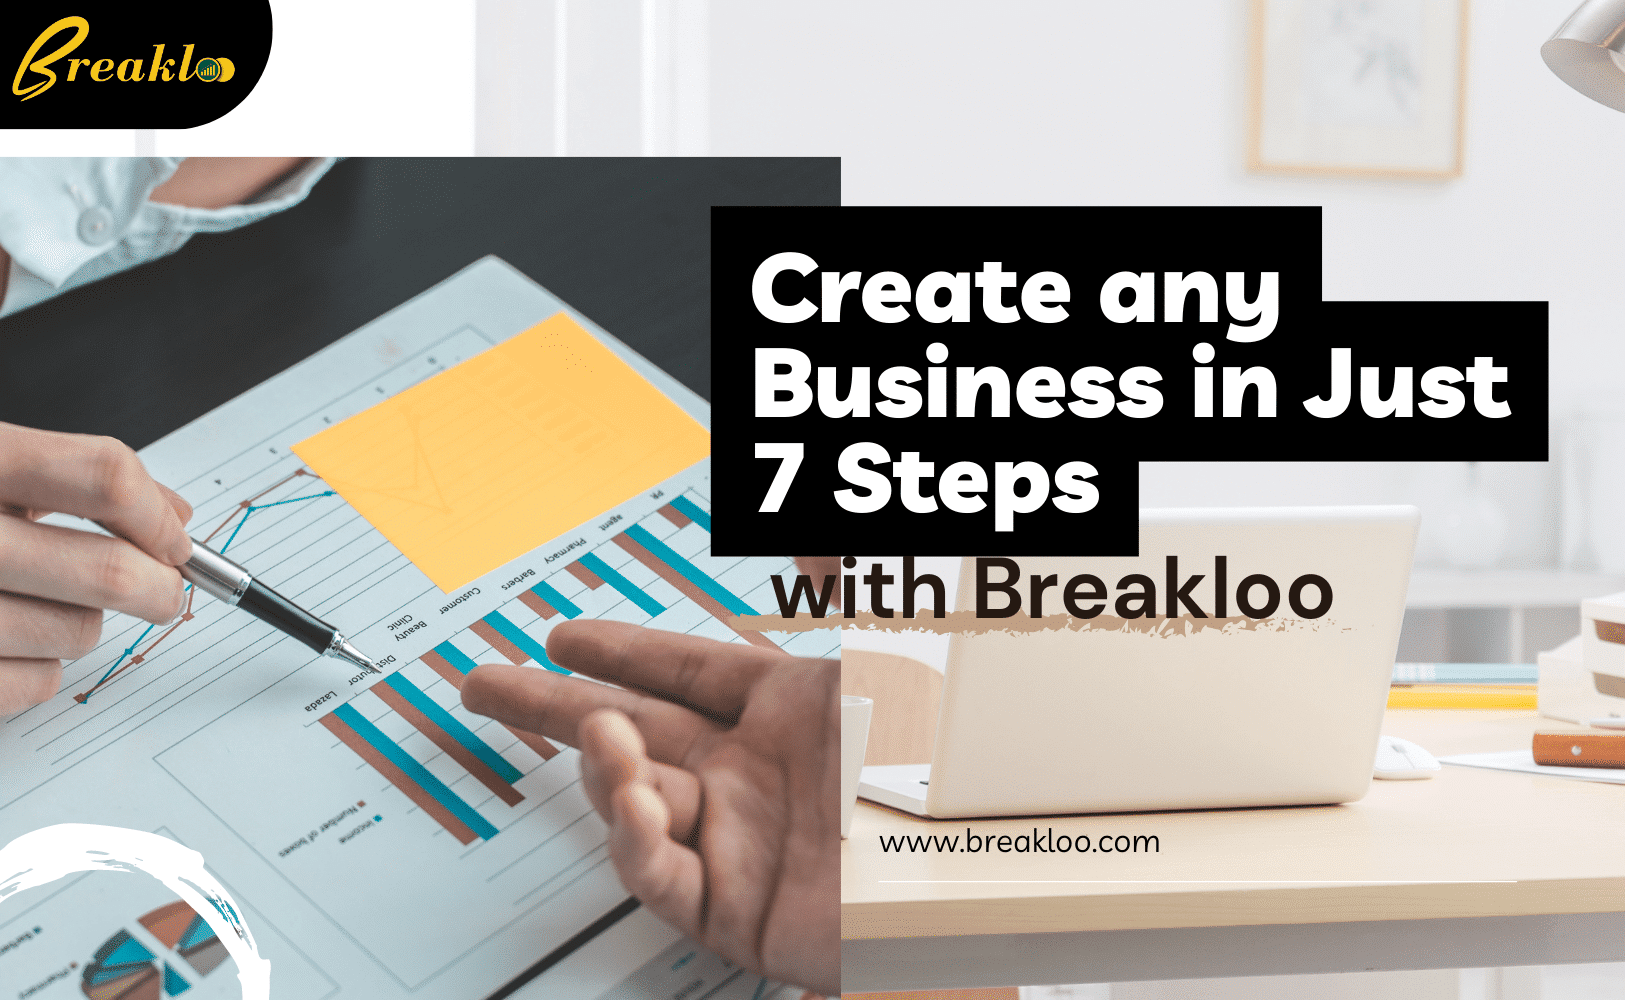 Create any Business in Just 7 Steps